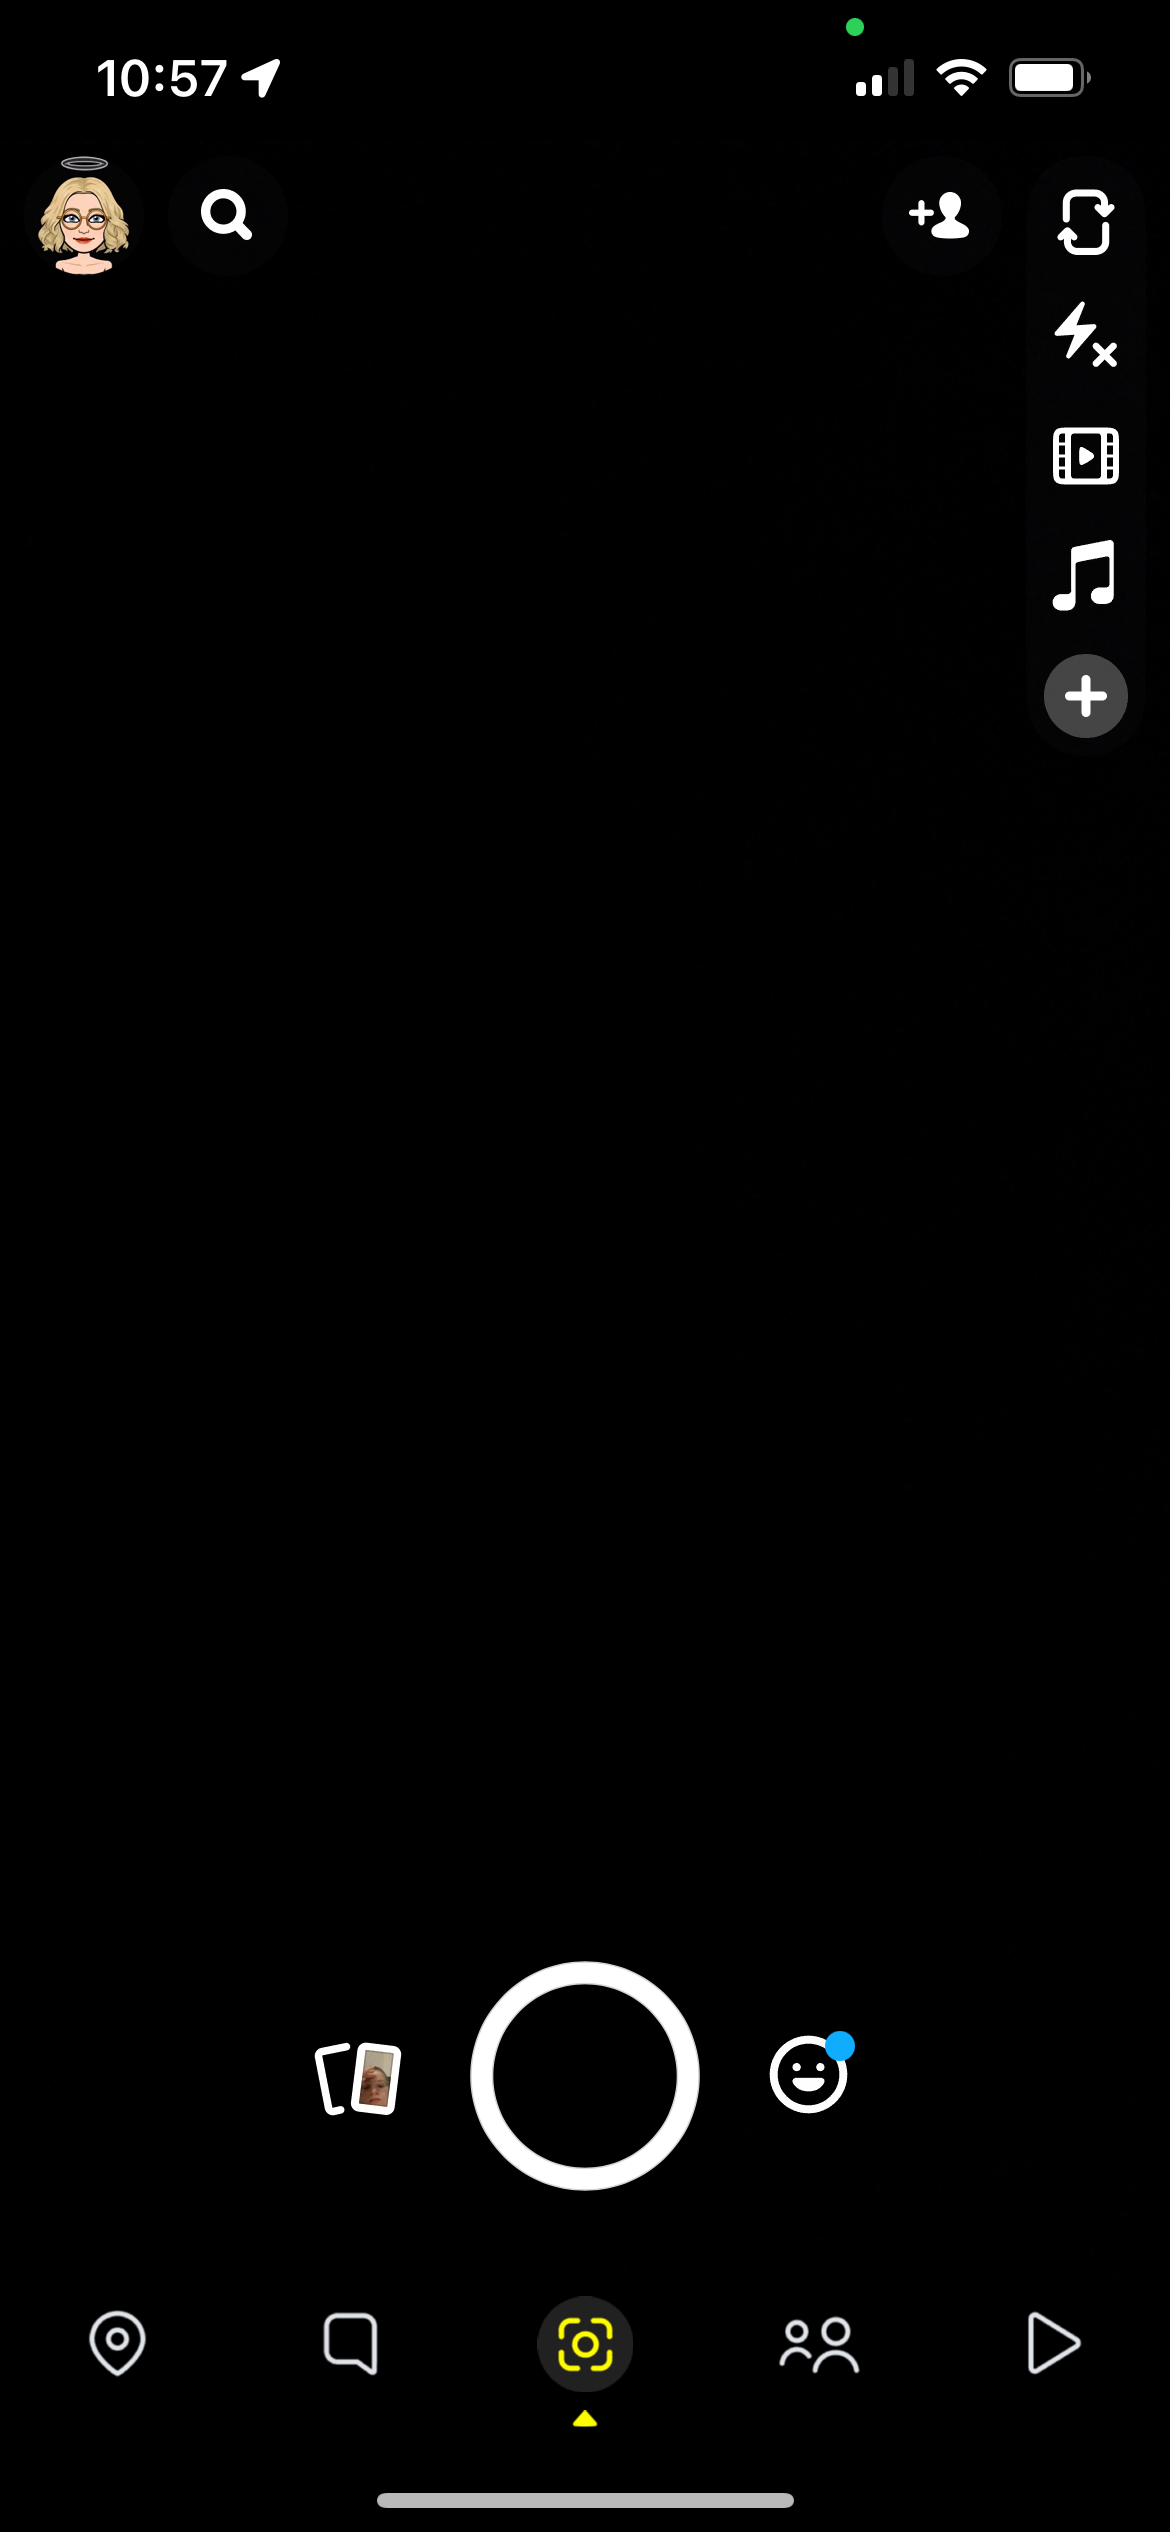 The black screen on Snapchat